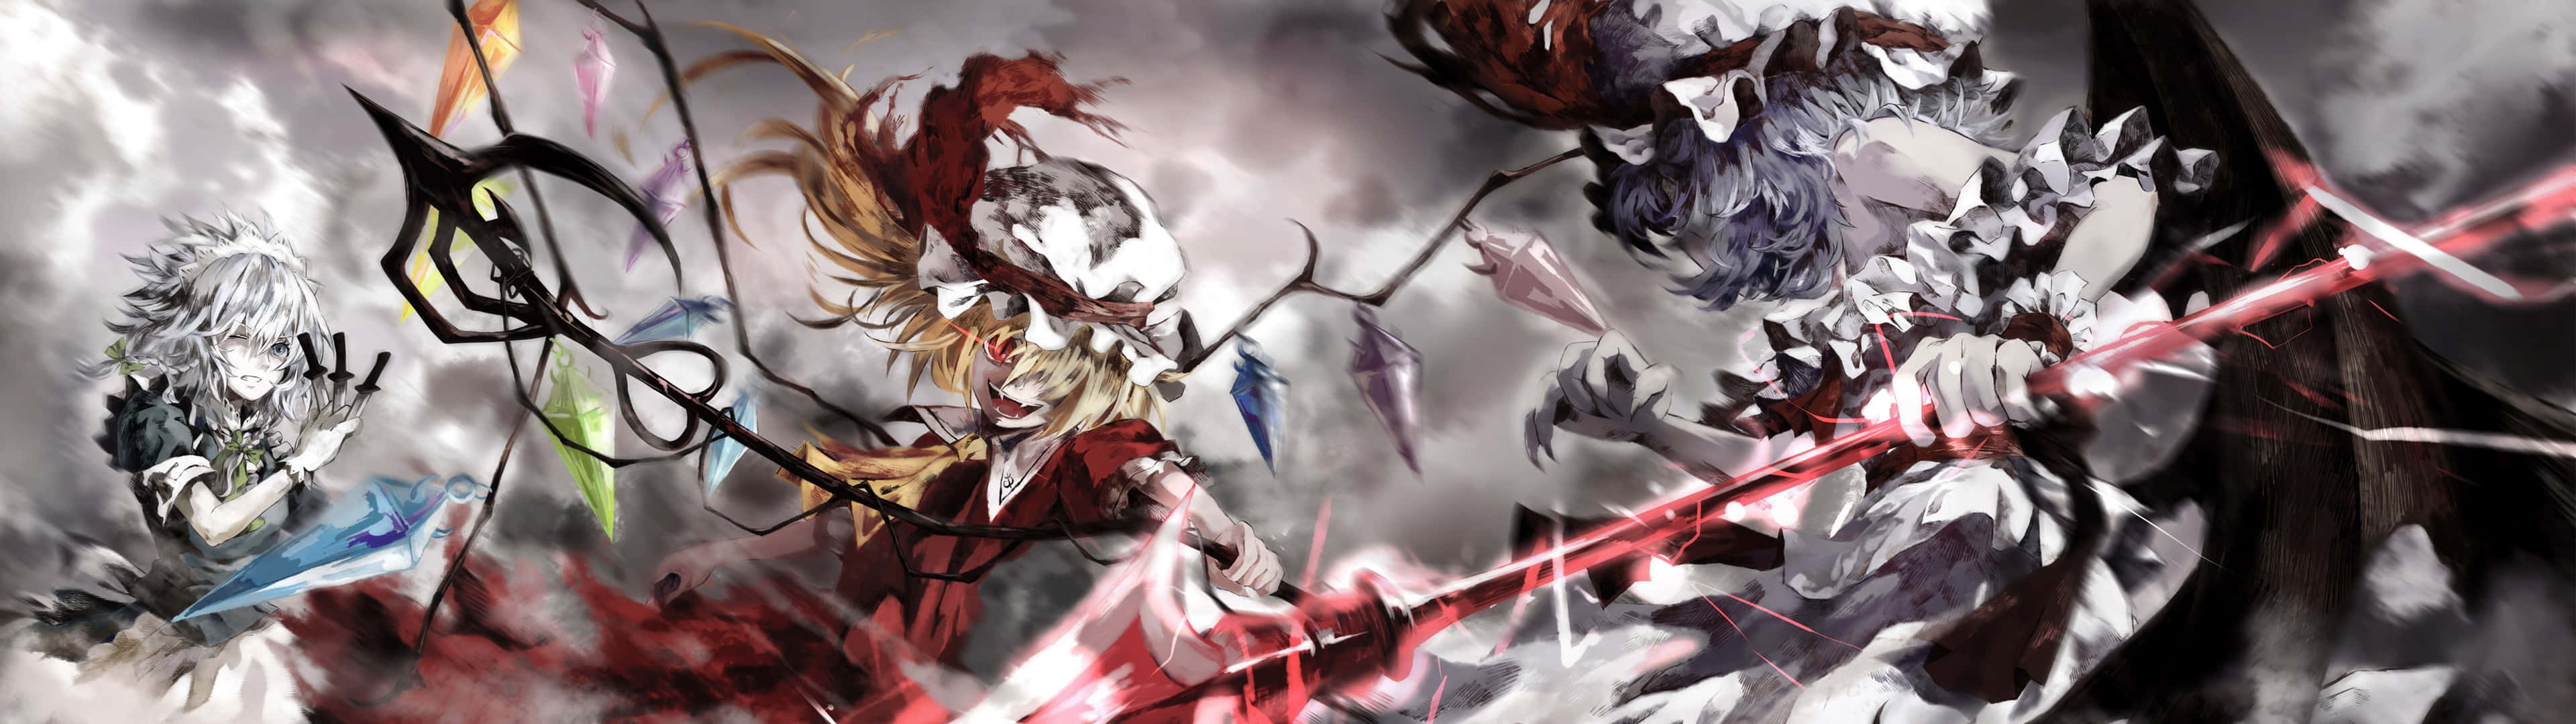 Touhou Project Anime Game Series 3840x1080 Picture